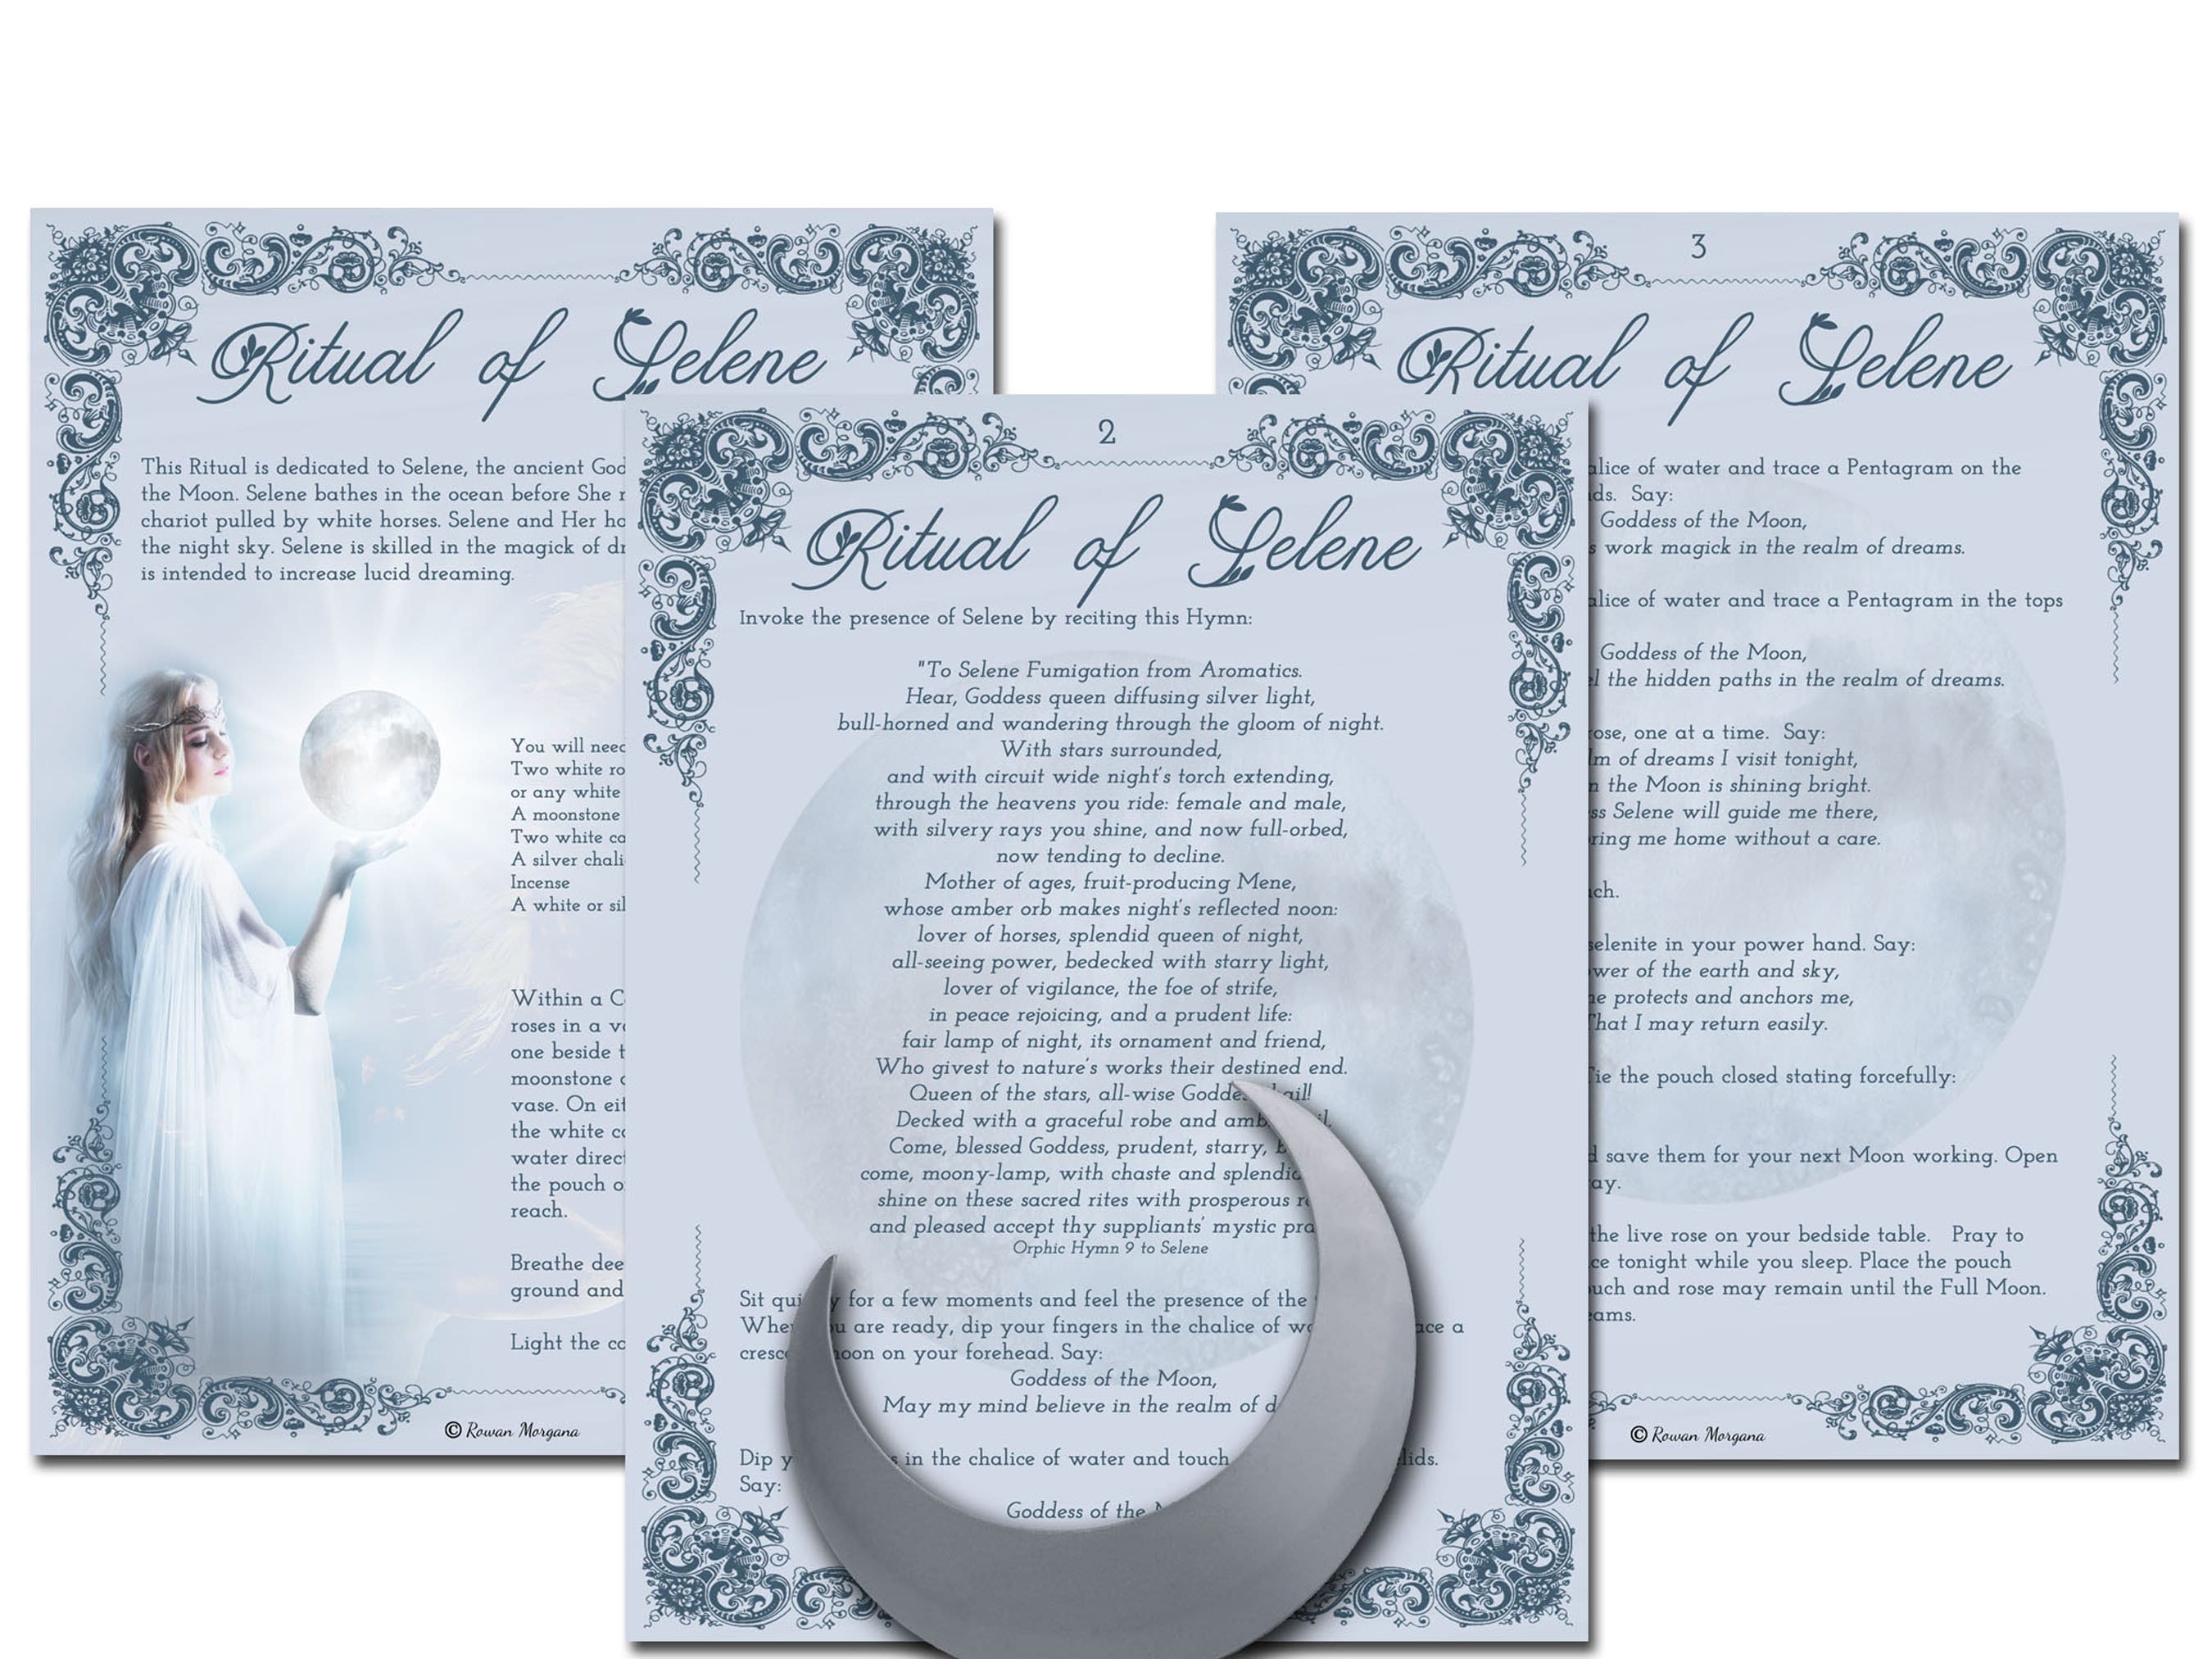 SELENE RITUAL 3 Pages, Witchcraft Moon Goddess Magic Spell, Dream Magic, Lucid Dreaming Spell, Wicca Witch Full Moon Pray Dream Spell - Morgana Magick Spell